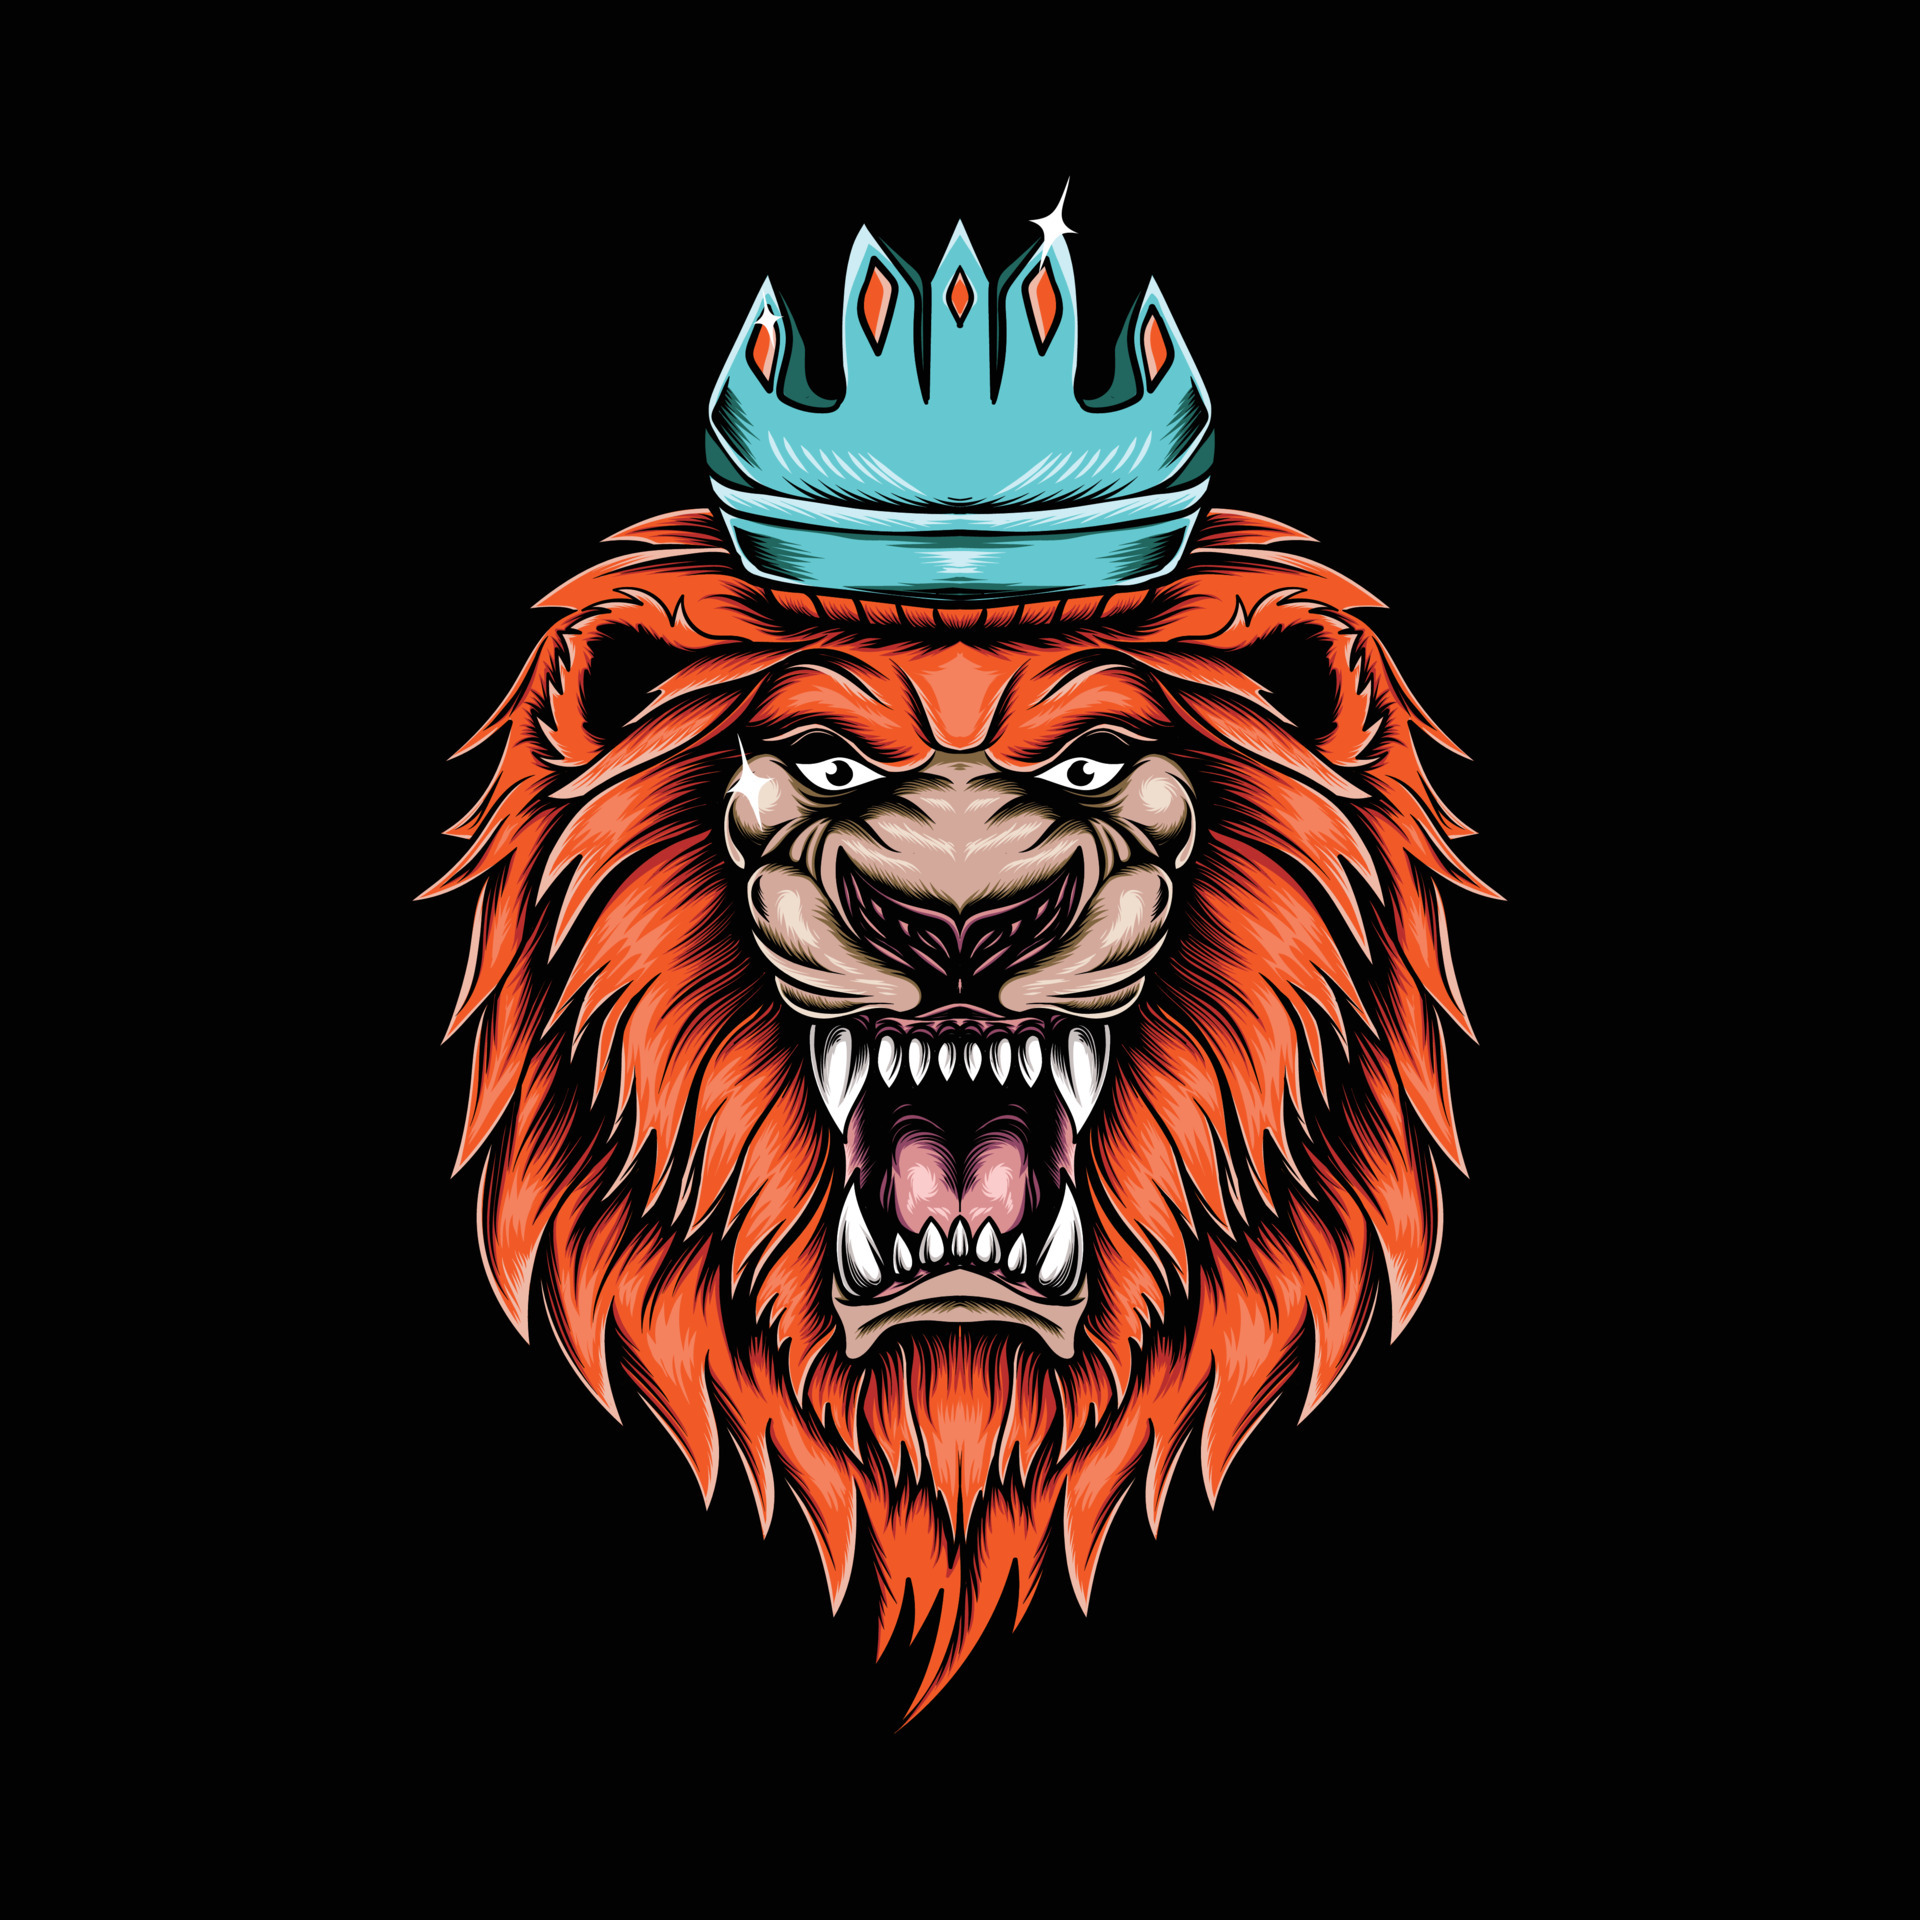 angry lion head king detail illustration with crown